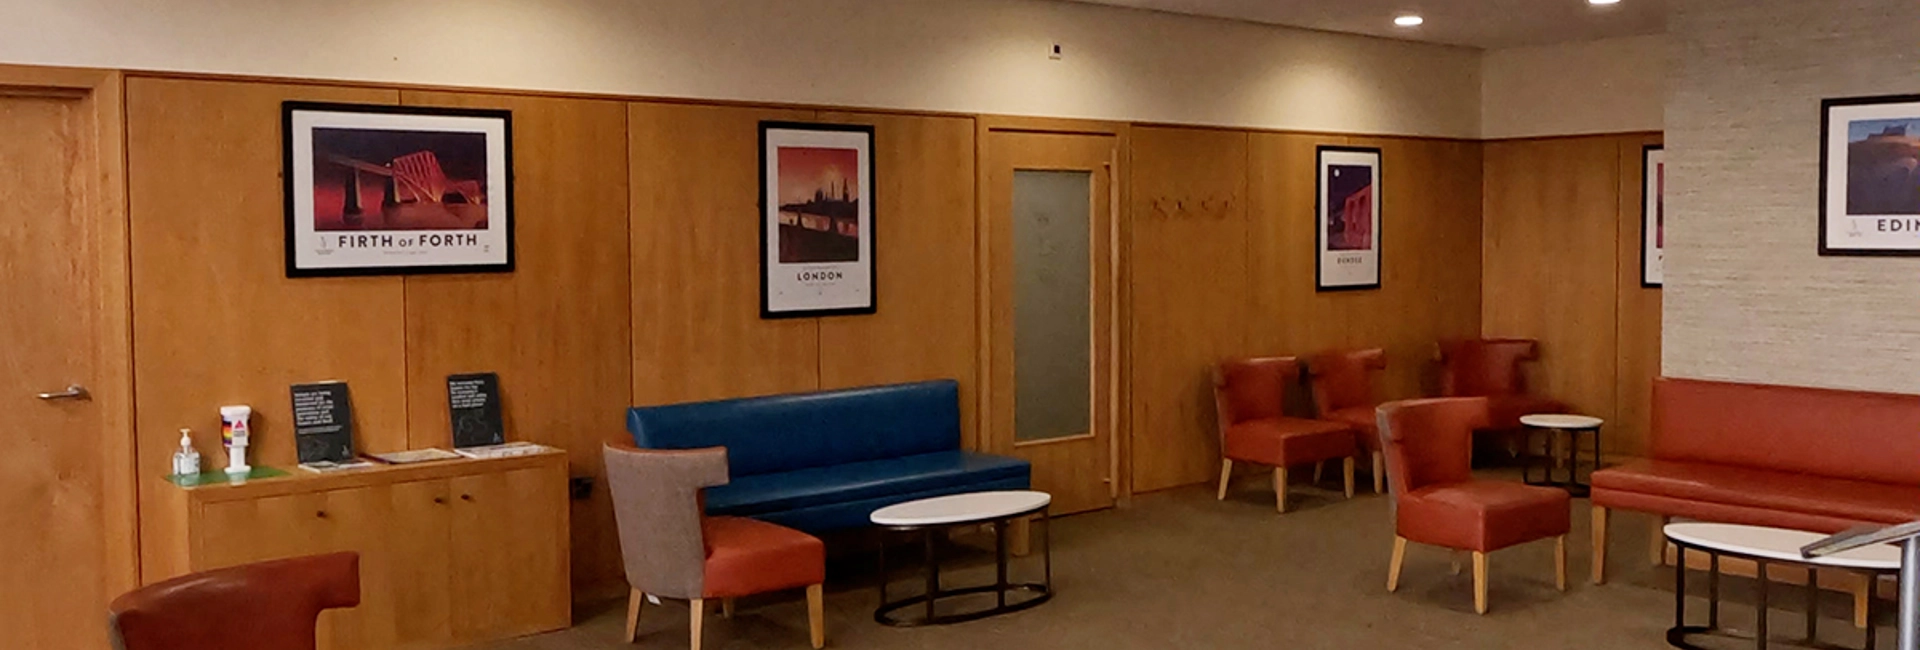 Caledonian Sleeper Fort William Guest Lounge